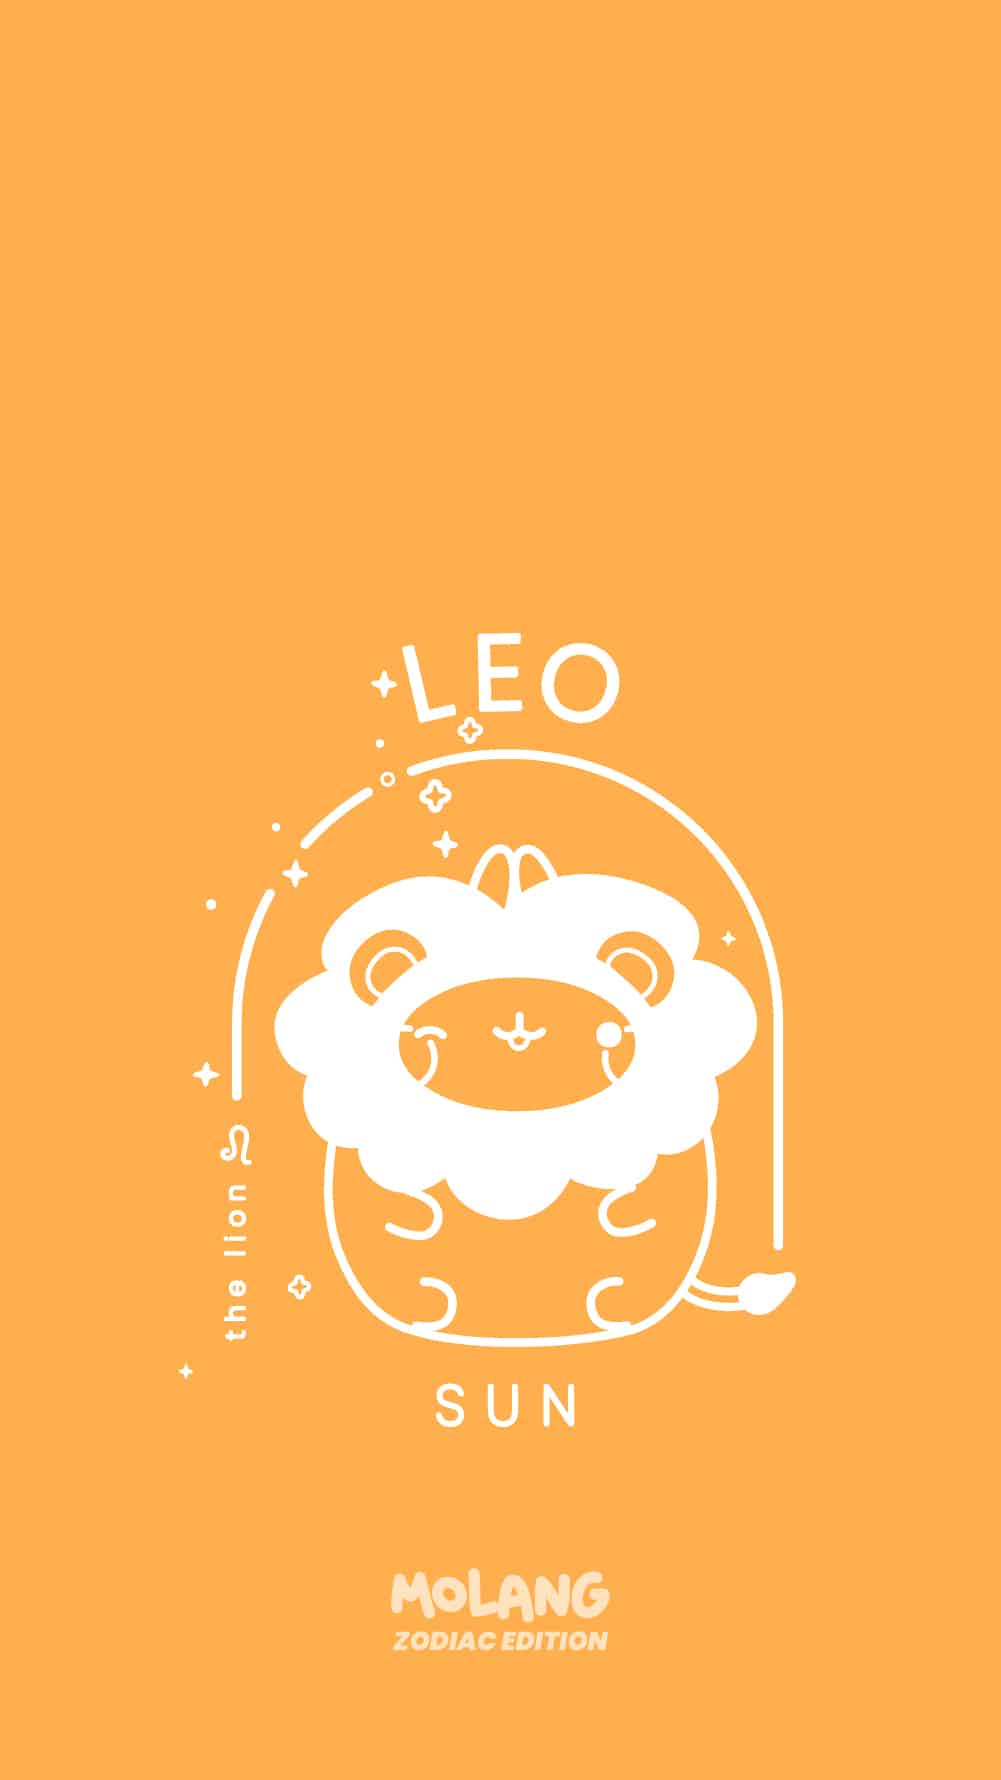 An illustration of a lion with the word Leo above it and the word Sun below it. - Molang, Leo